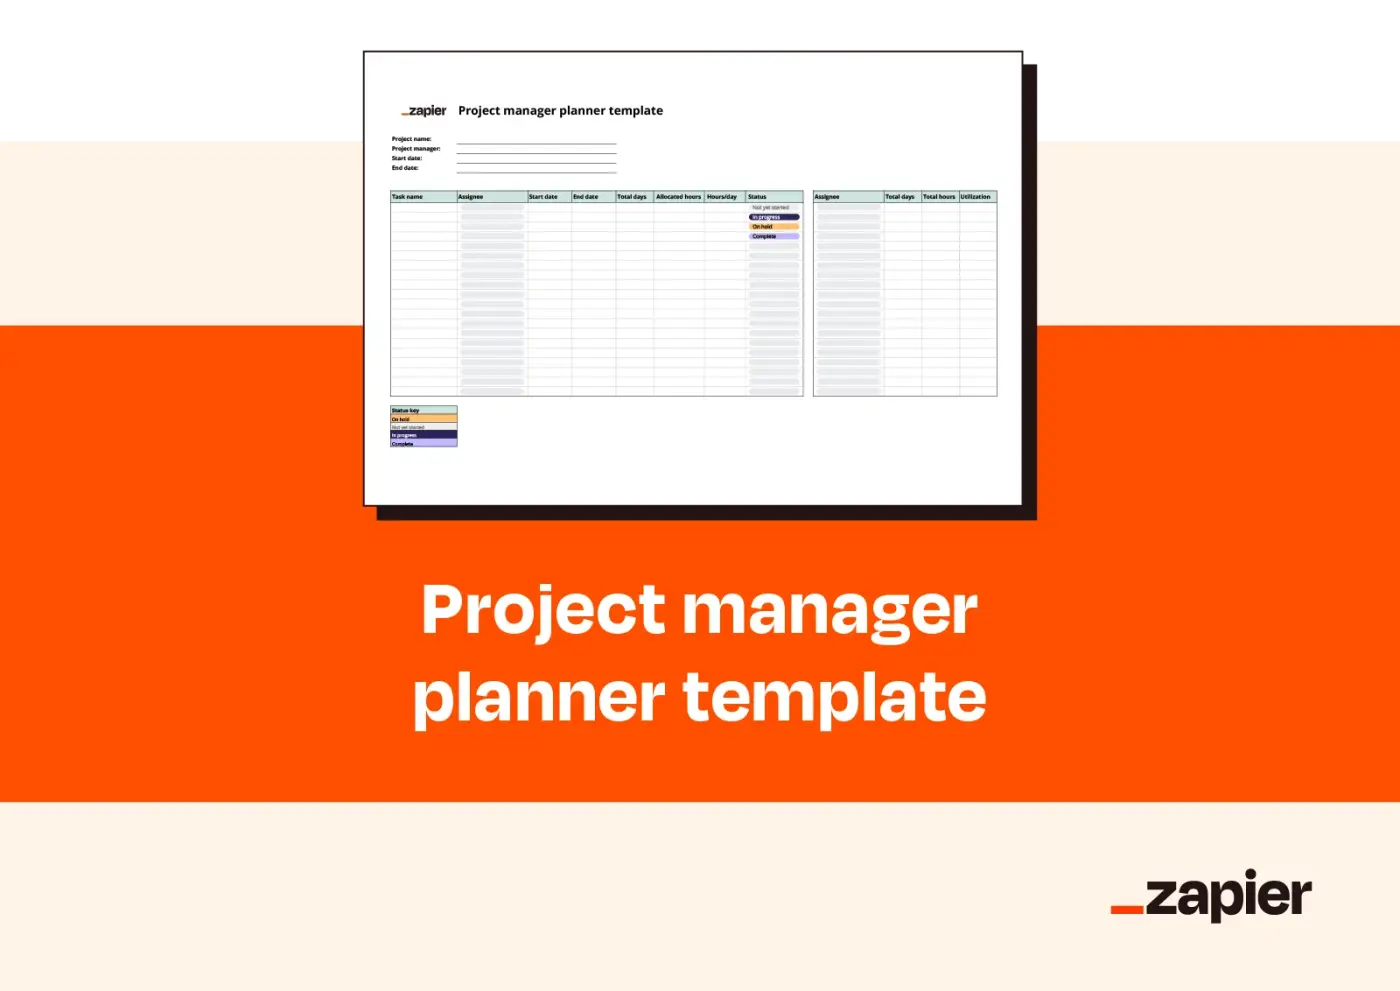 Mockup showcasing Zapier's project manager planner template